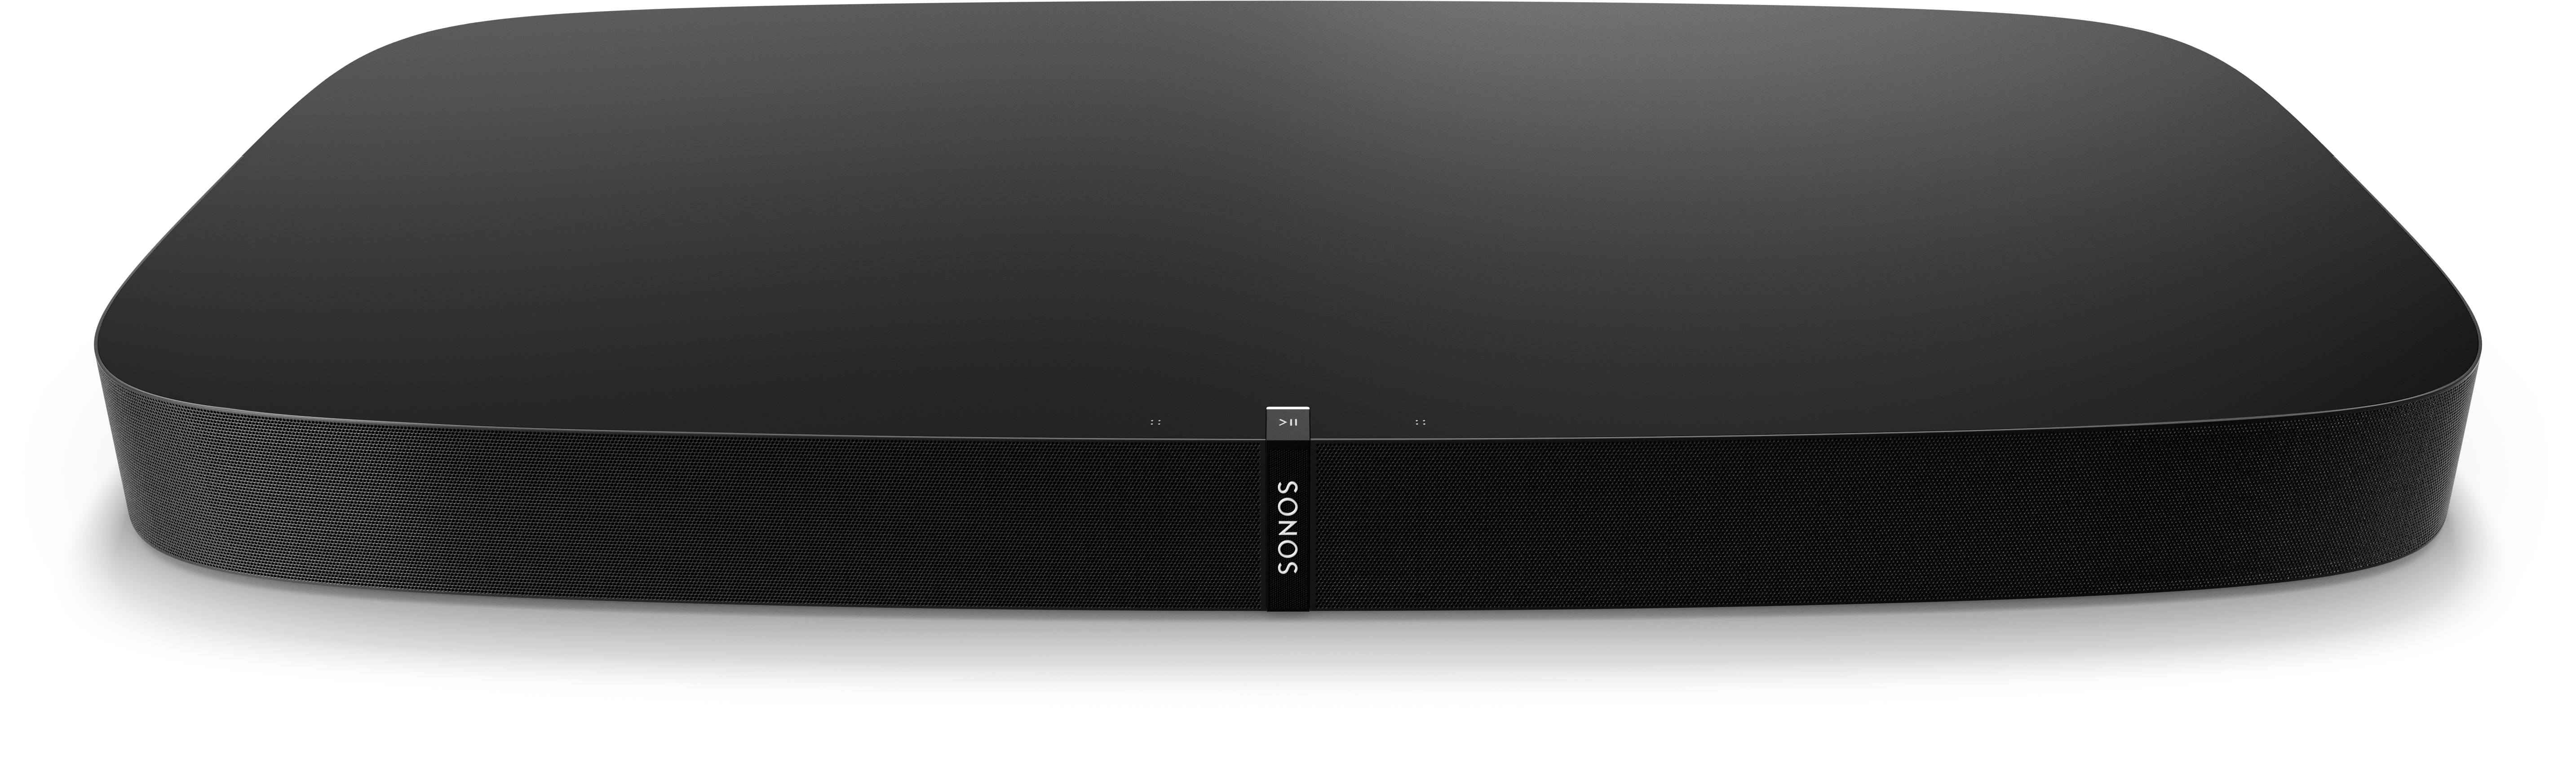 sonos speakers how to connect